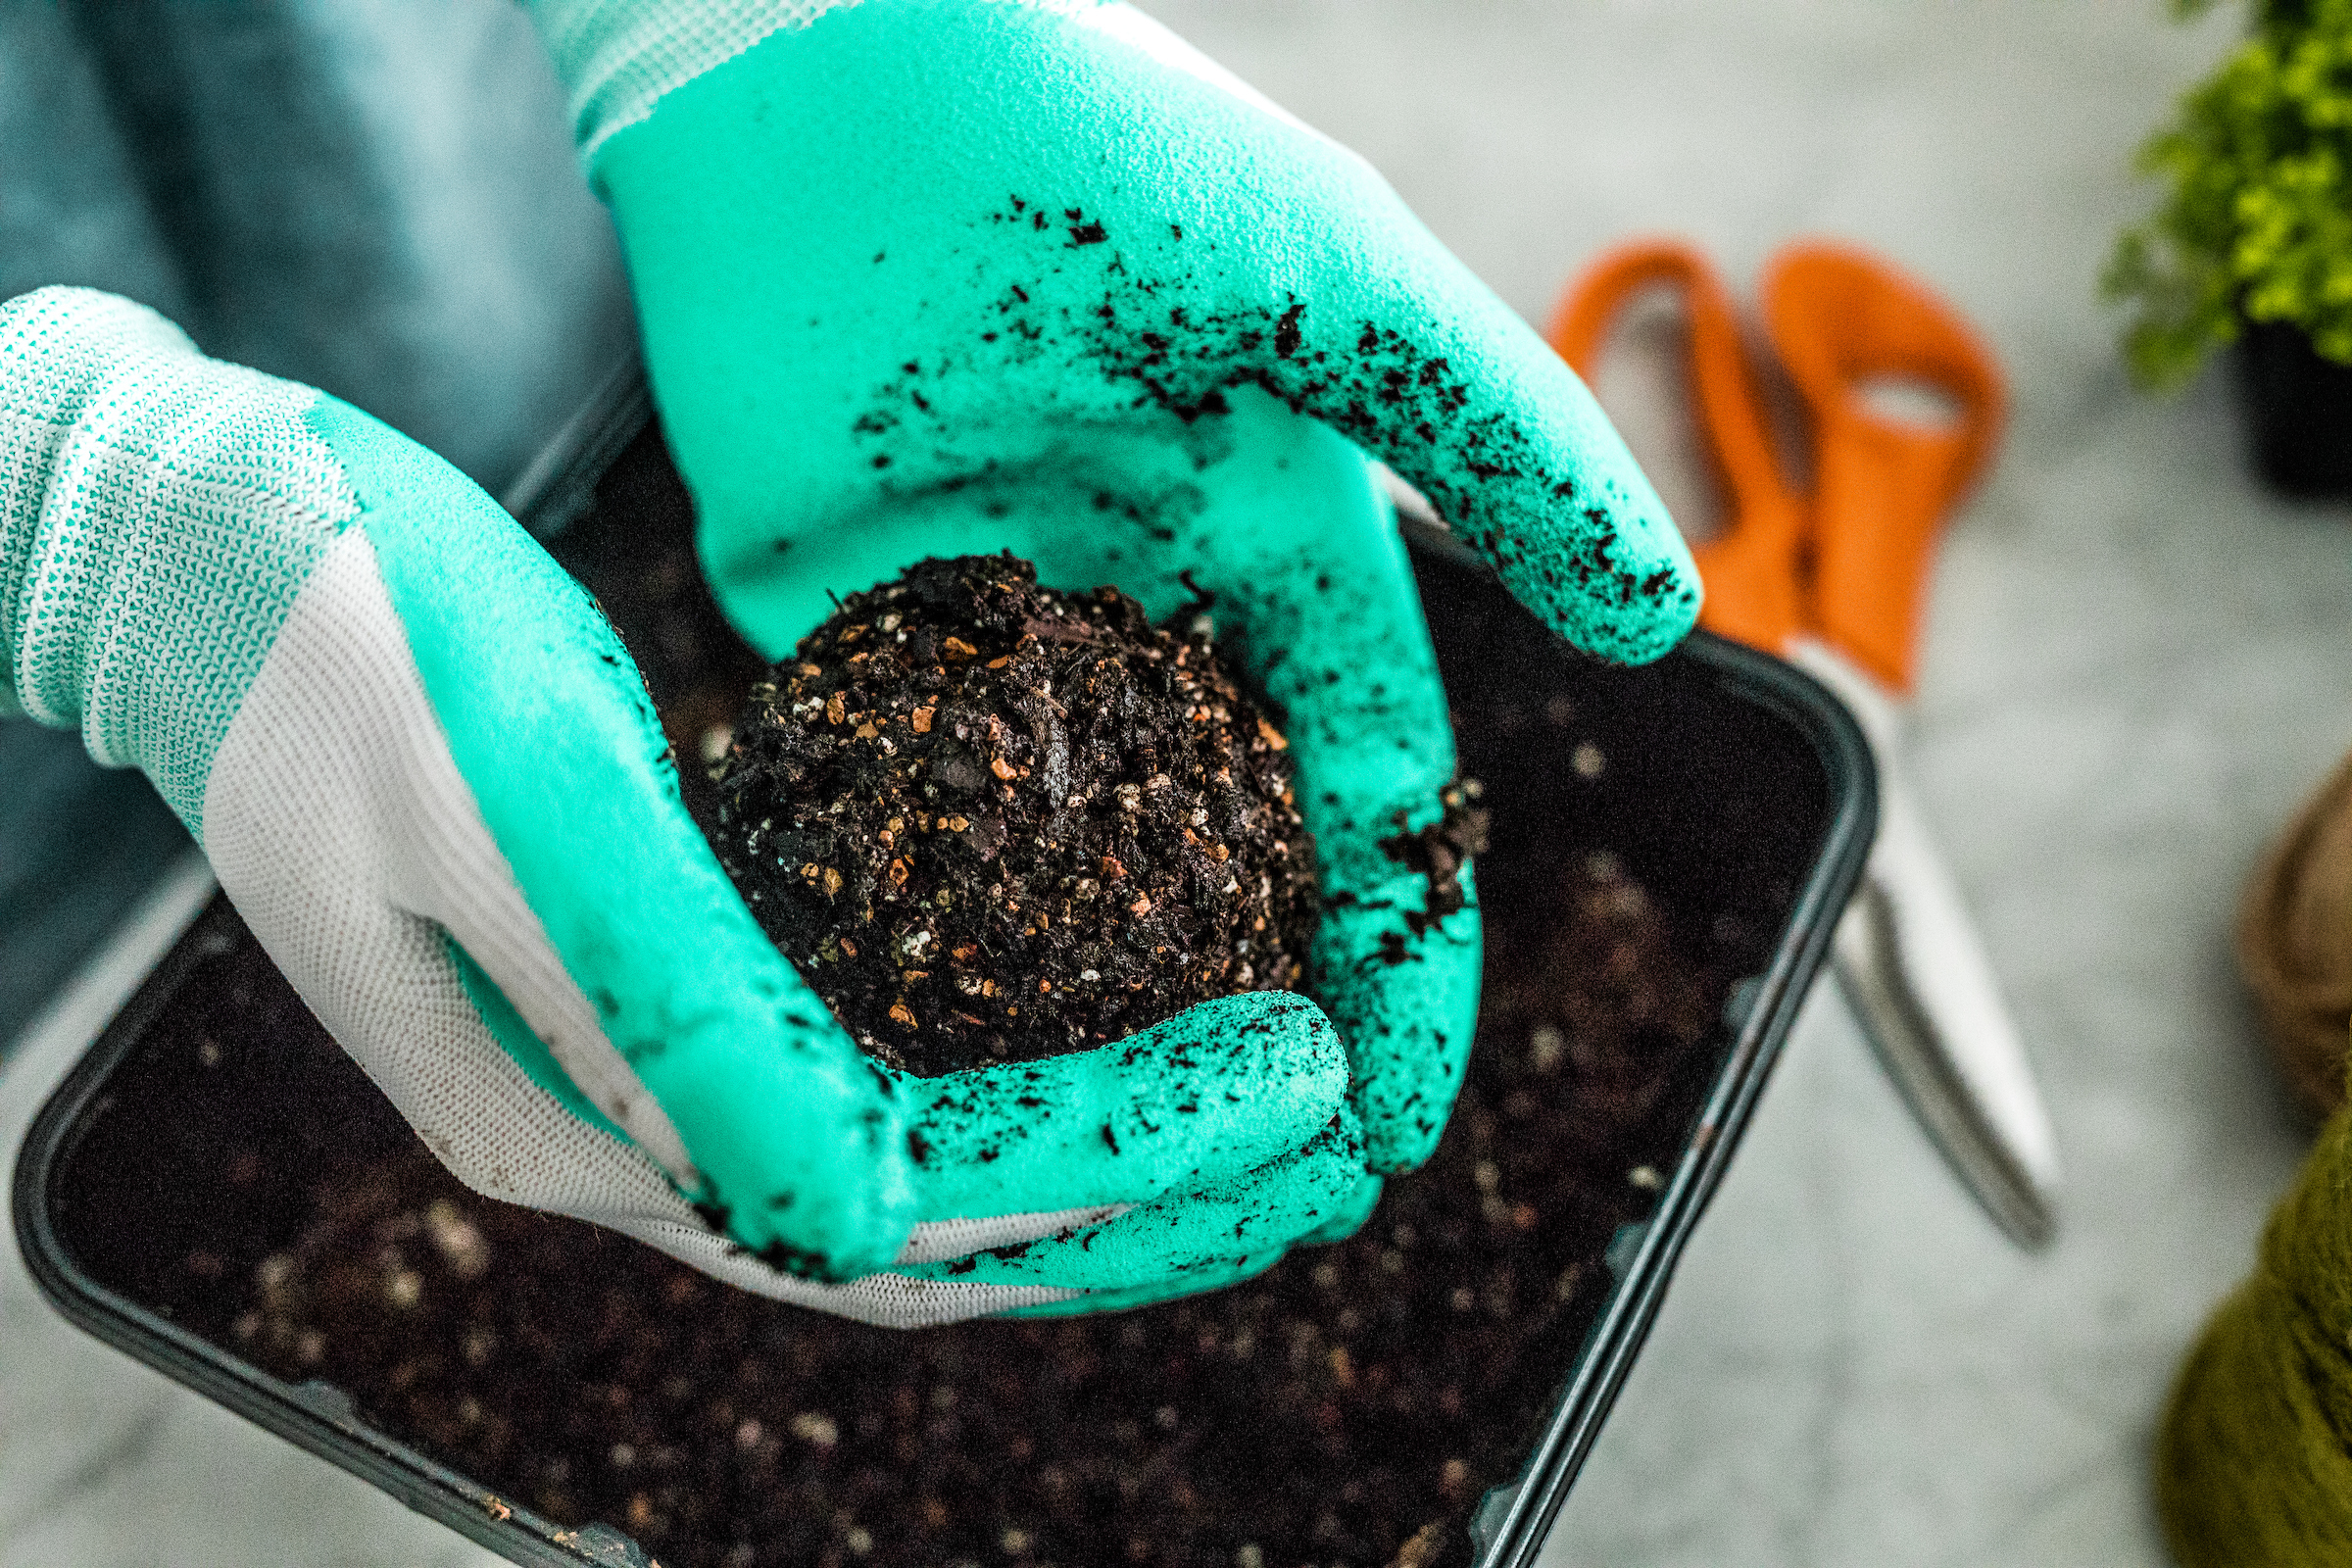 Pour soil into a clean container and add water until soil is damp enough that you can shape it into a sphere about four to eight inches in diameter. (Larger spheres give root systems more room to grow.)